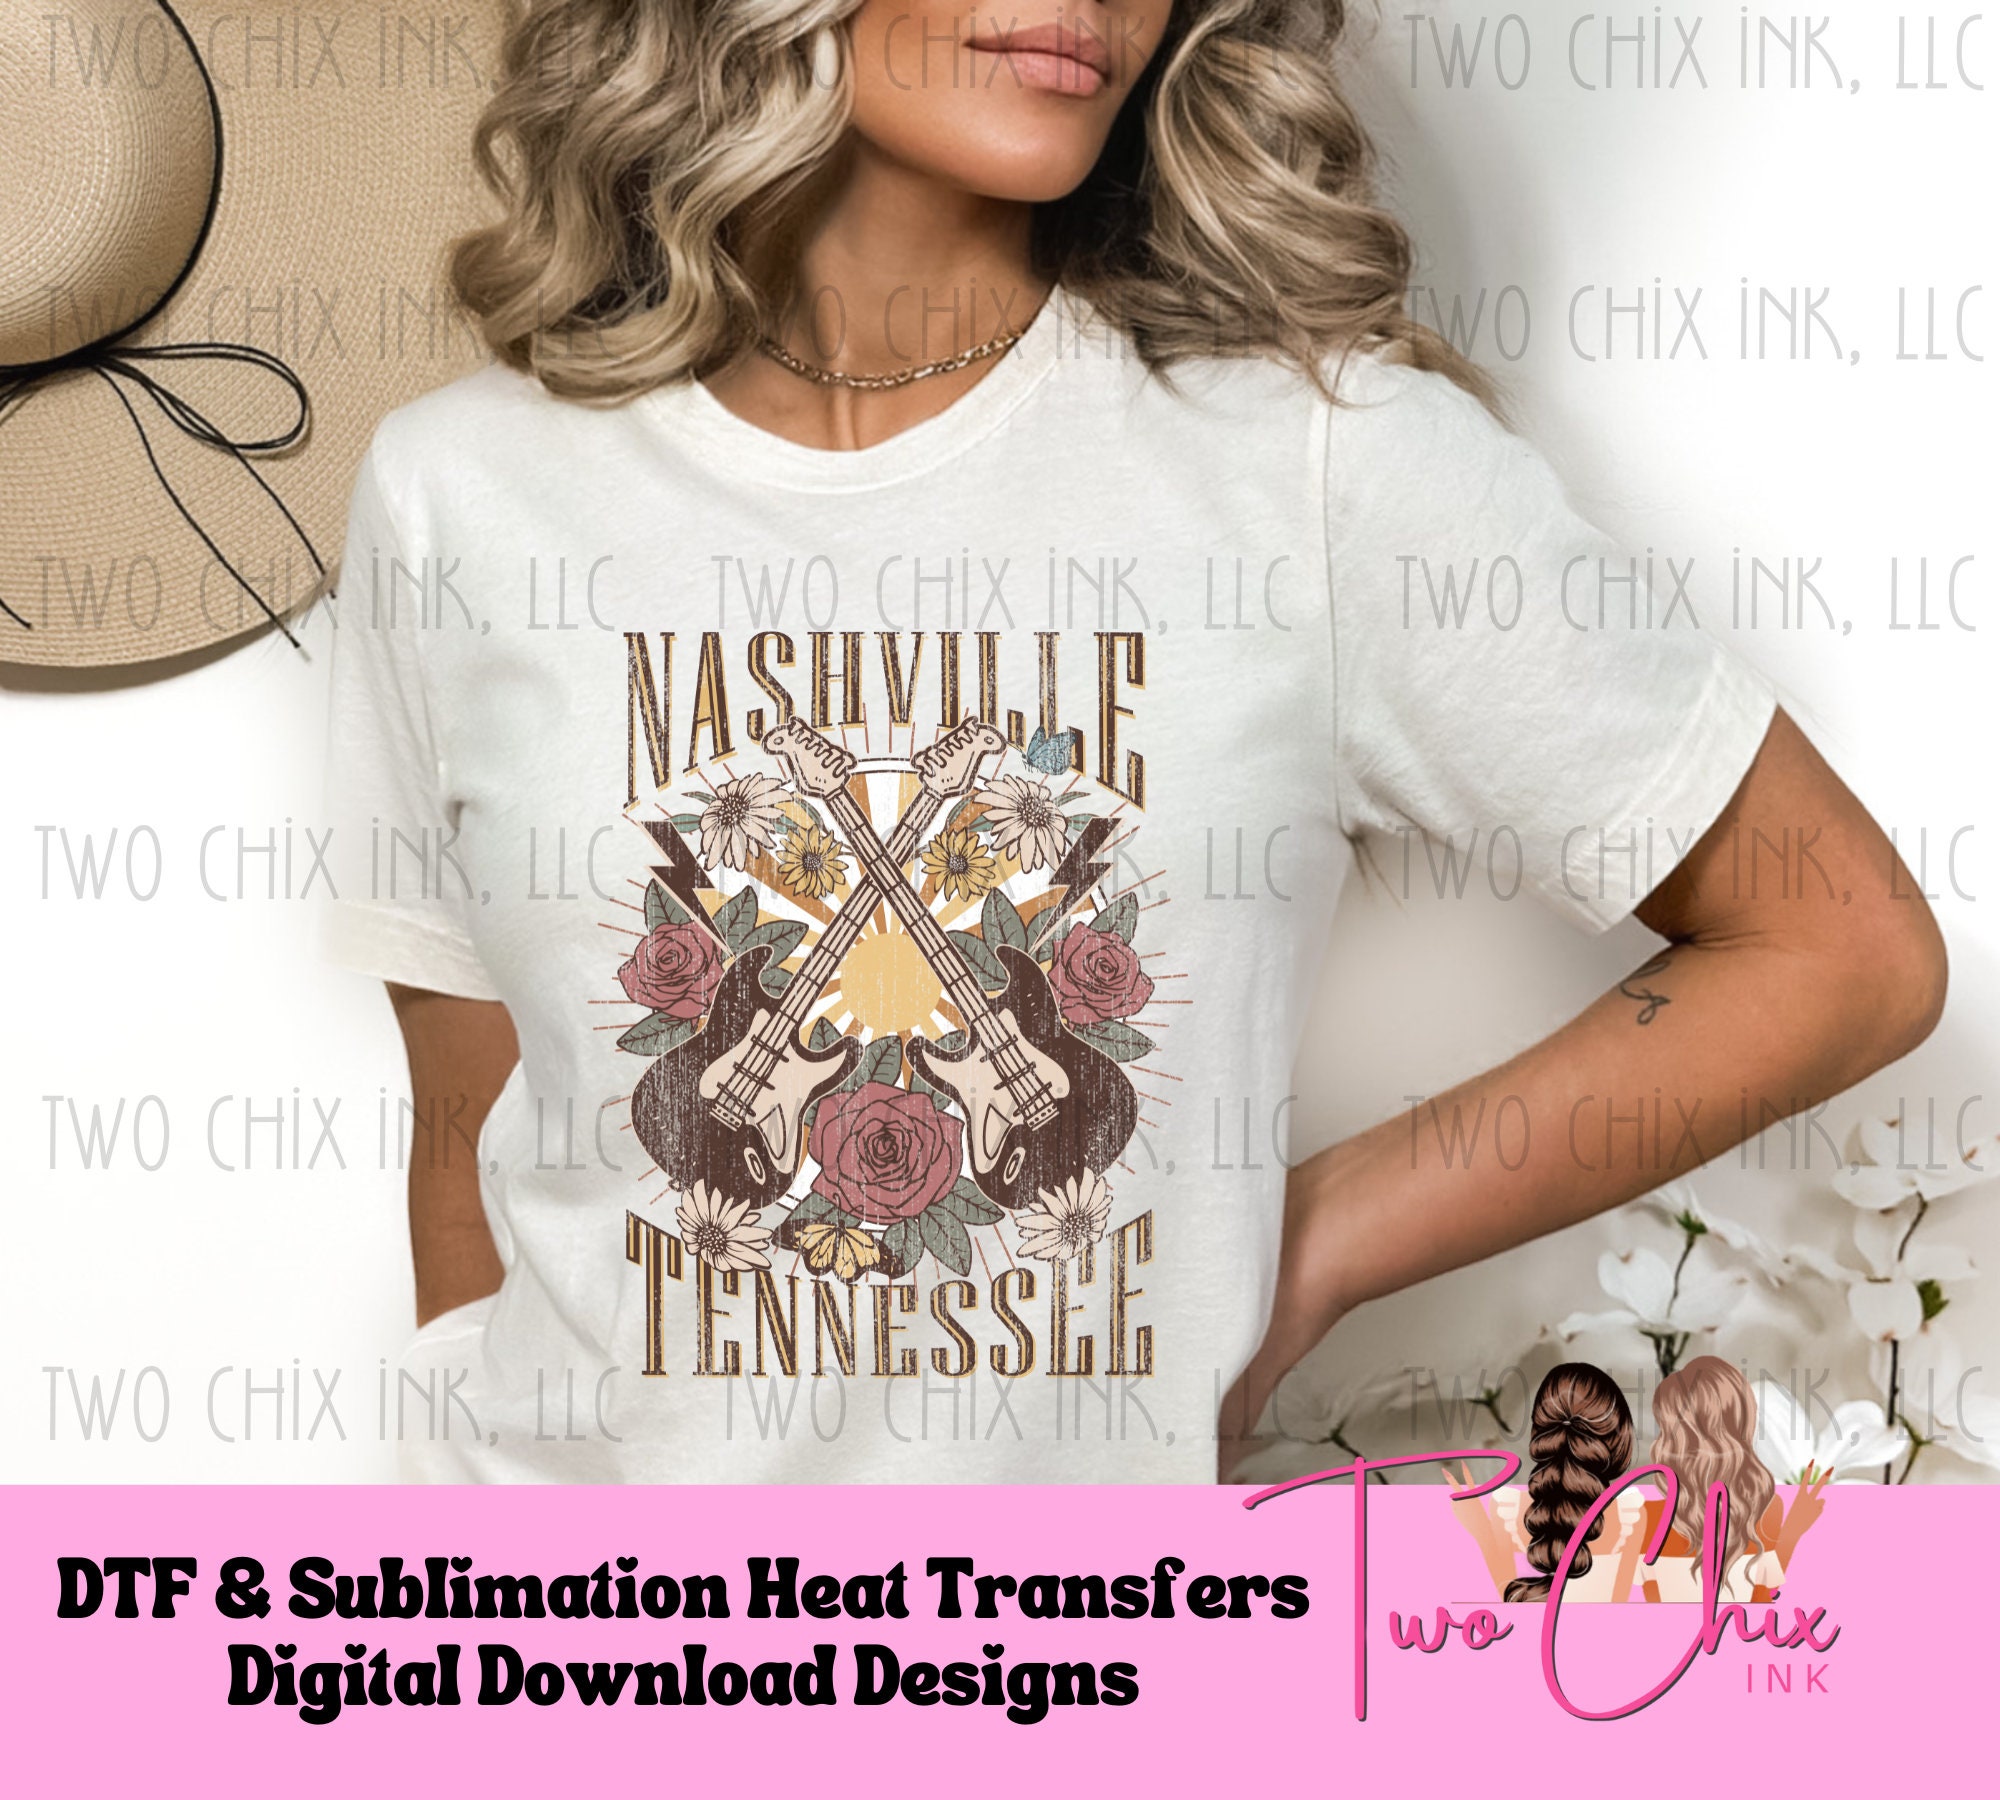 Sublimation Print Design Tennessee Whiskey Ready to Press Heat Transfer